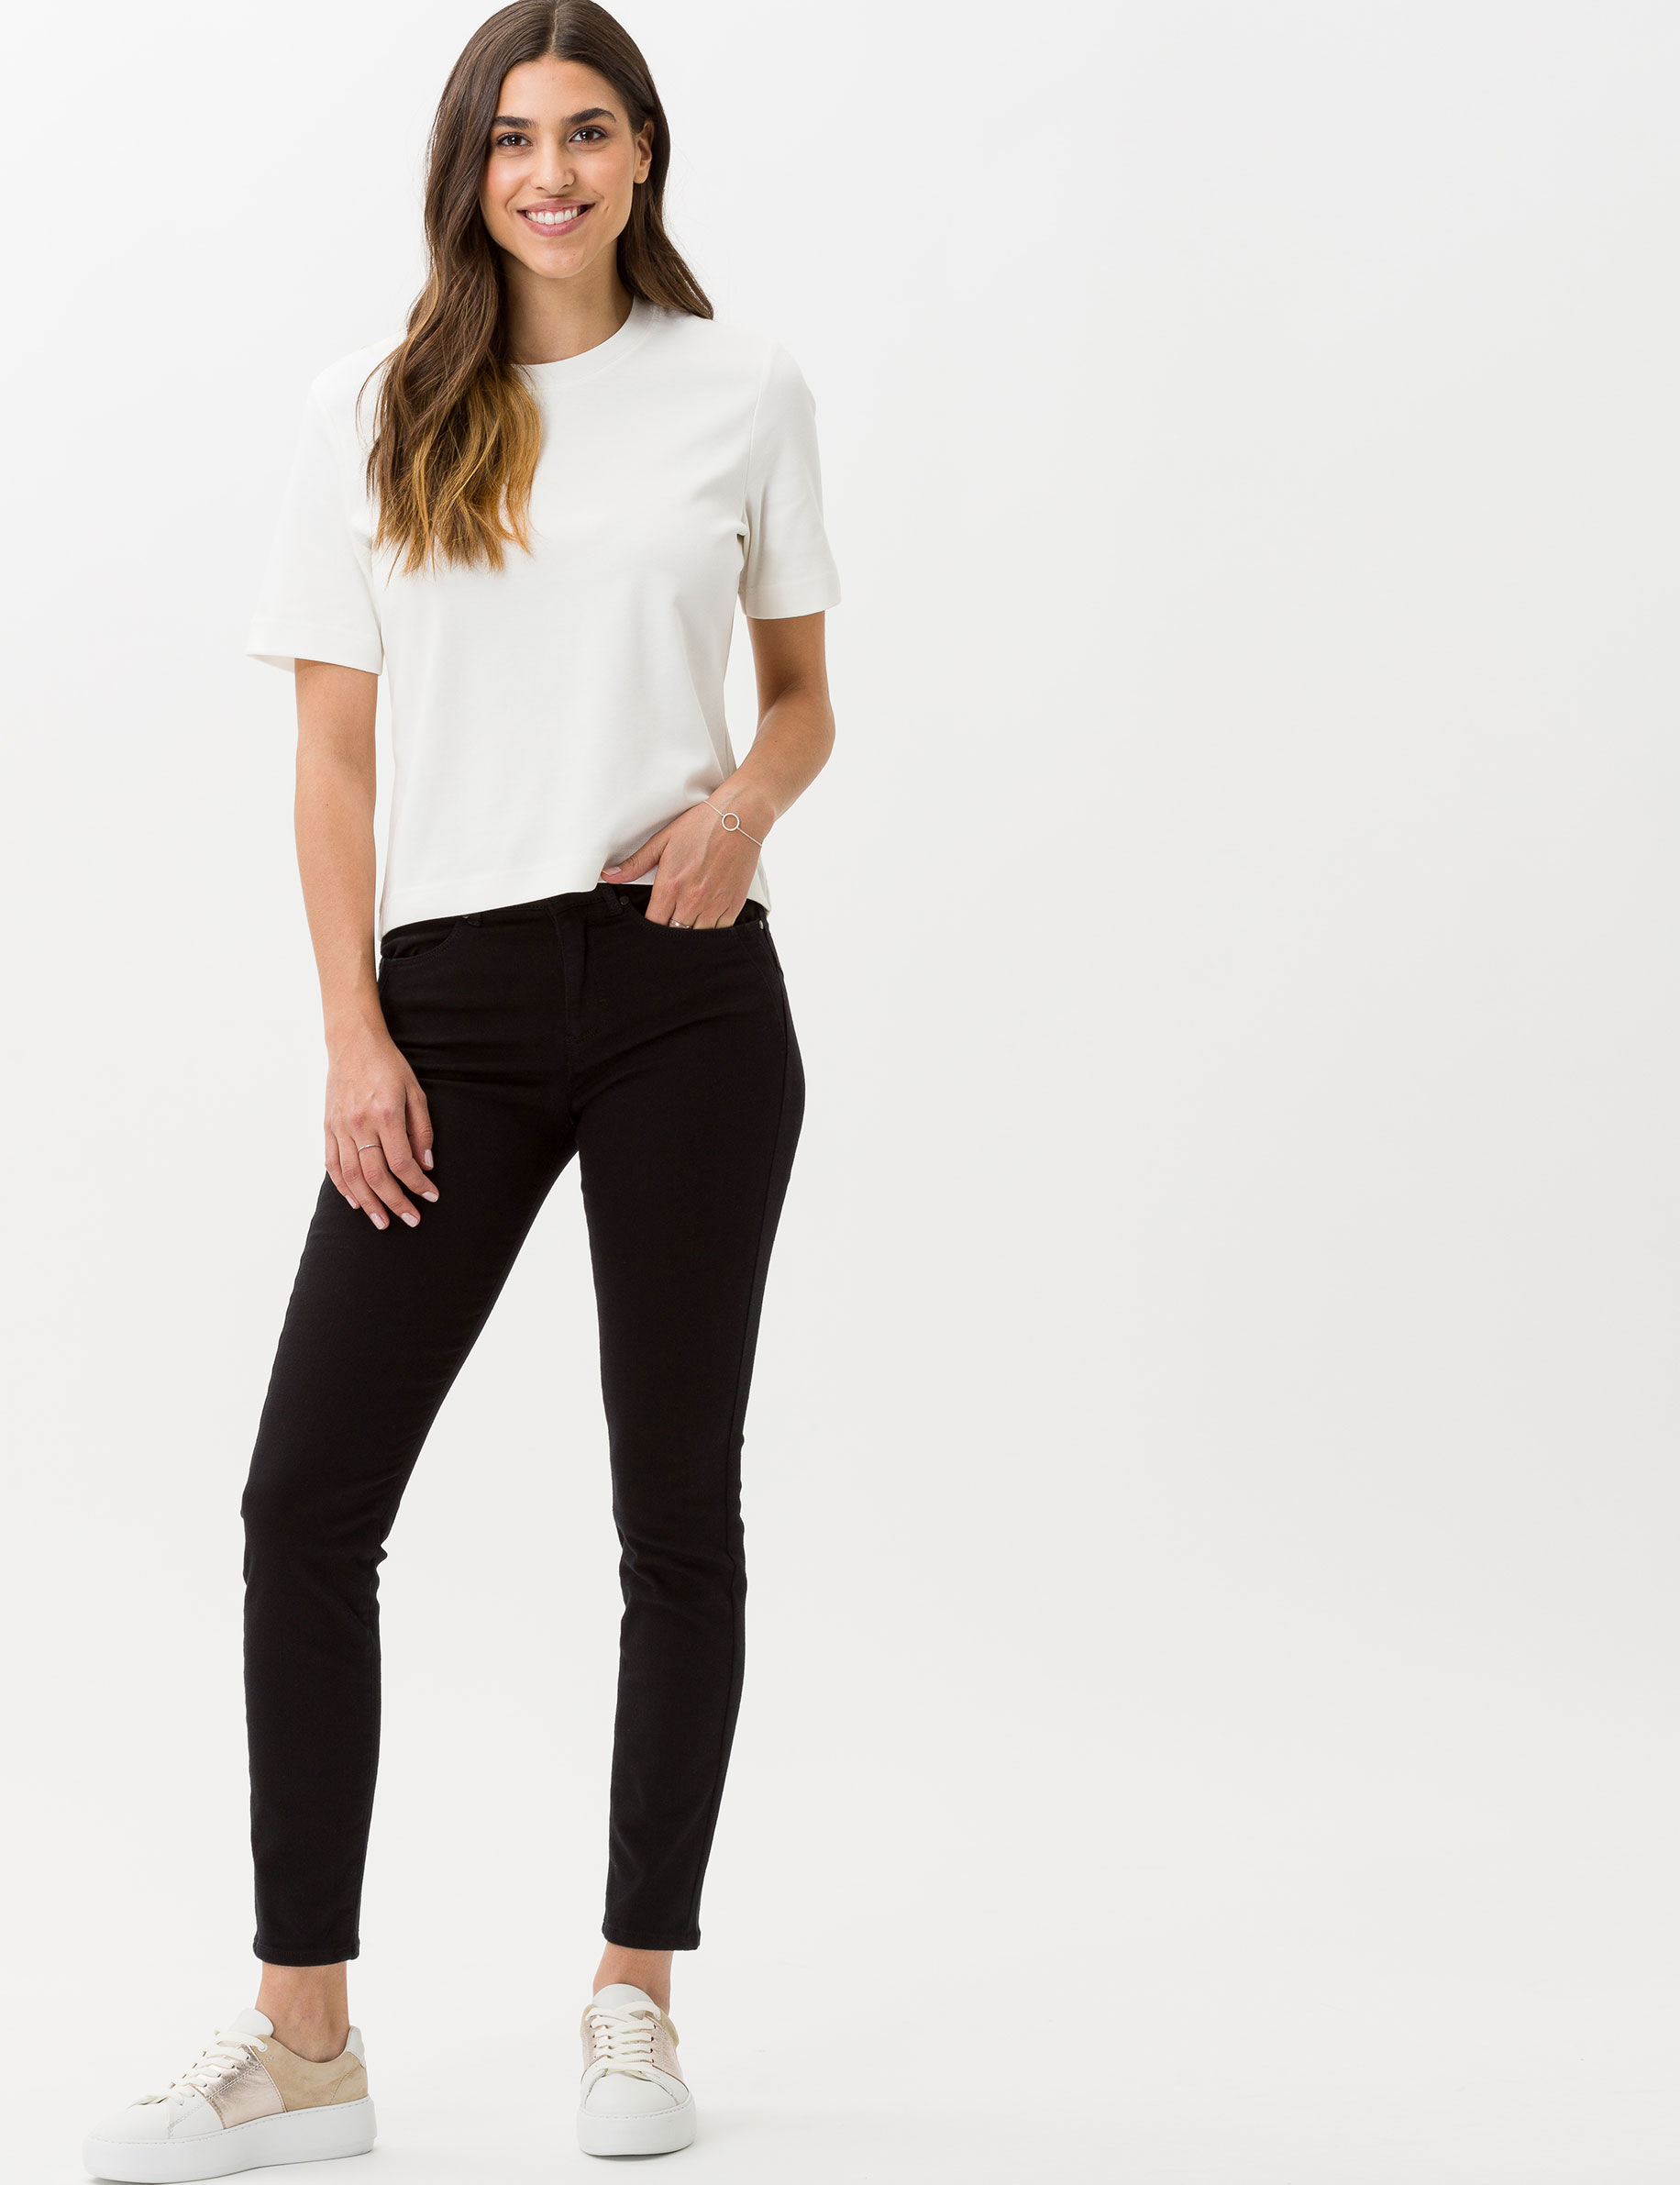 Women Style ANA CLEAN PERMA BLACK Skinny Fit Model Outfit